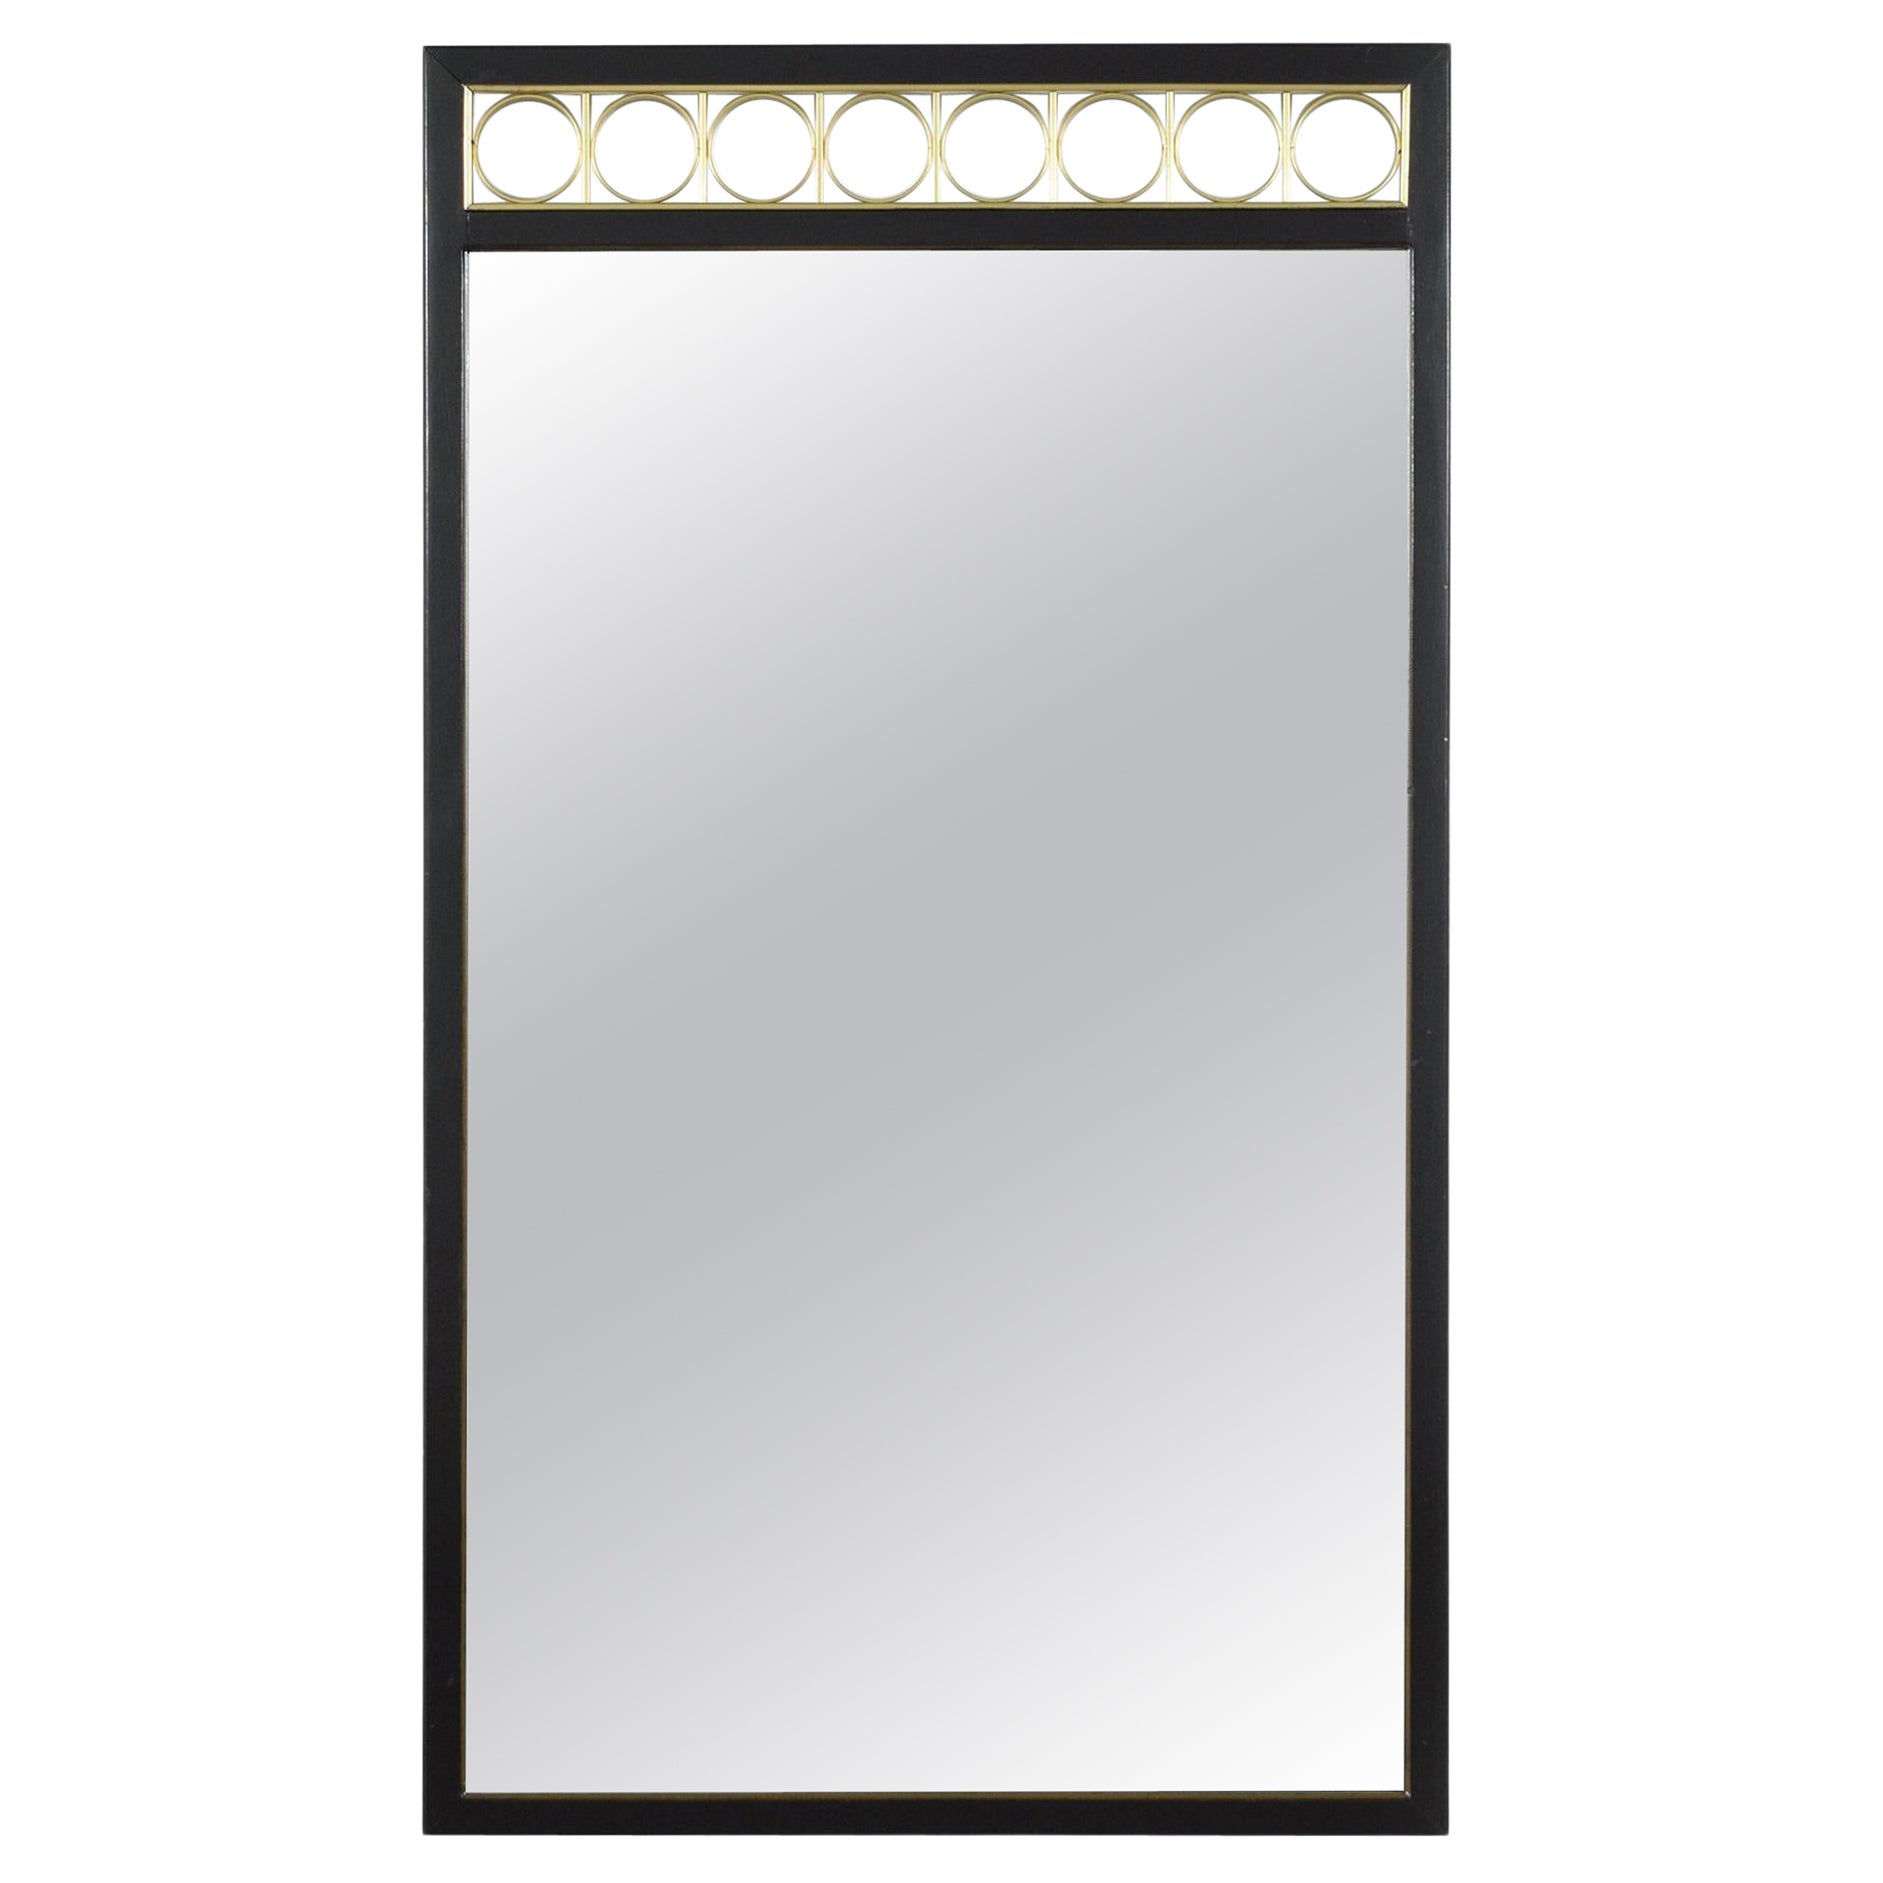 Elegance Midcentury Mahogany Wall Mirror : Sophistication Timeless pour The Moderns